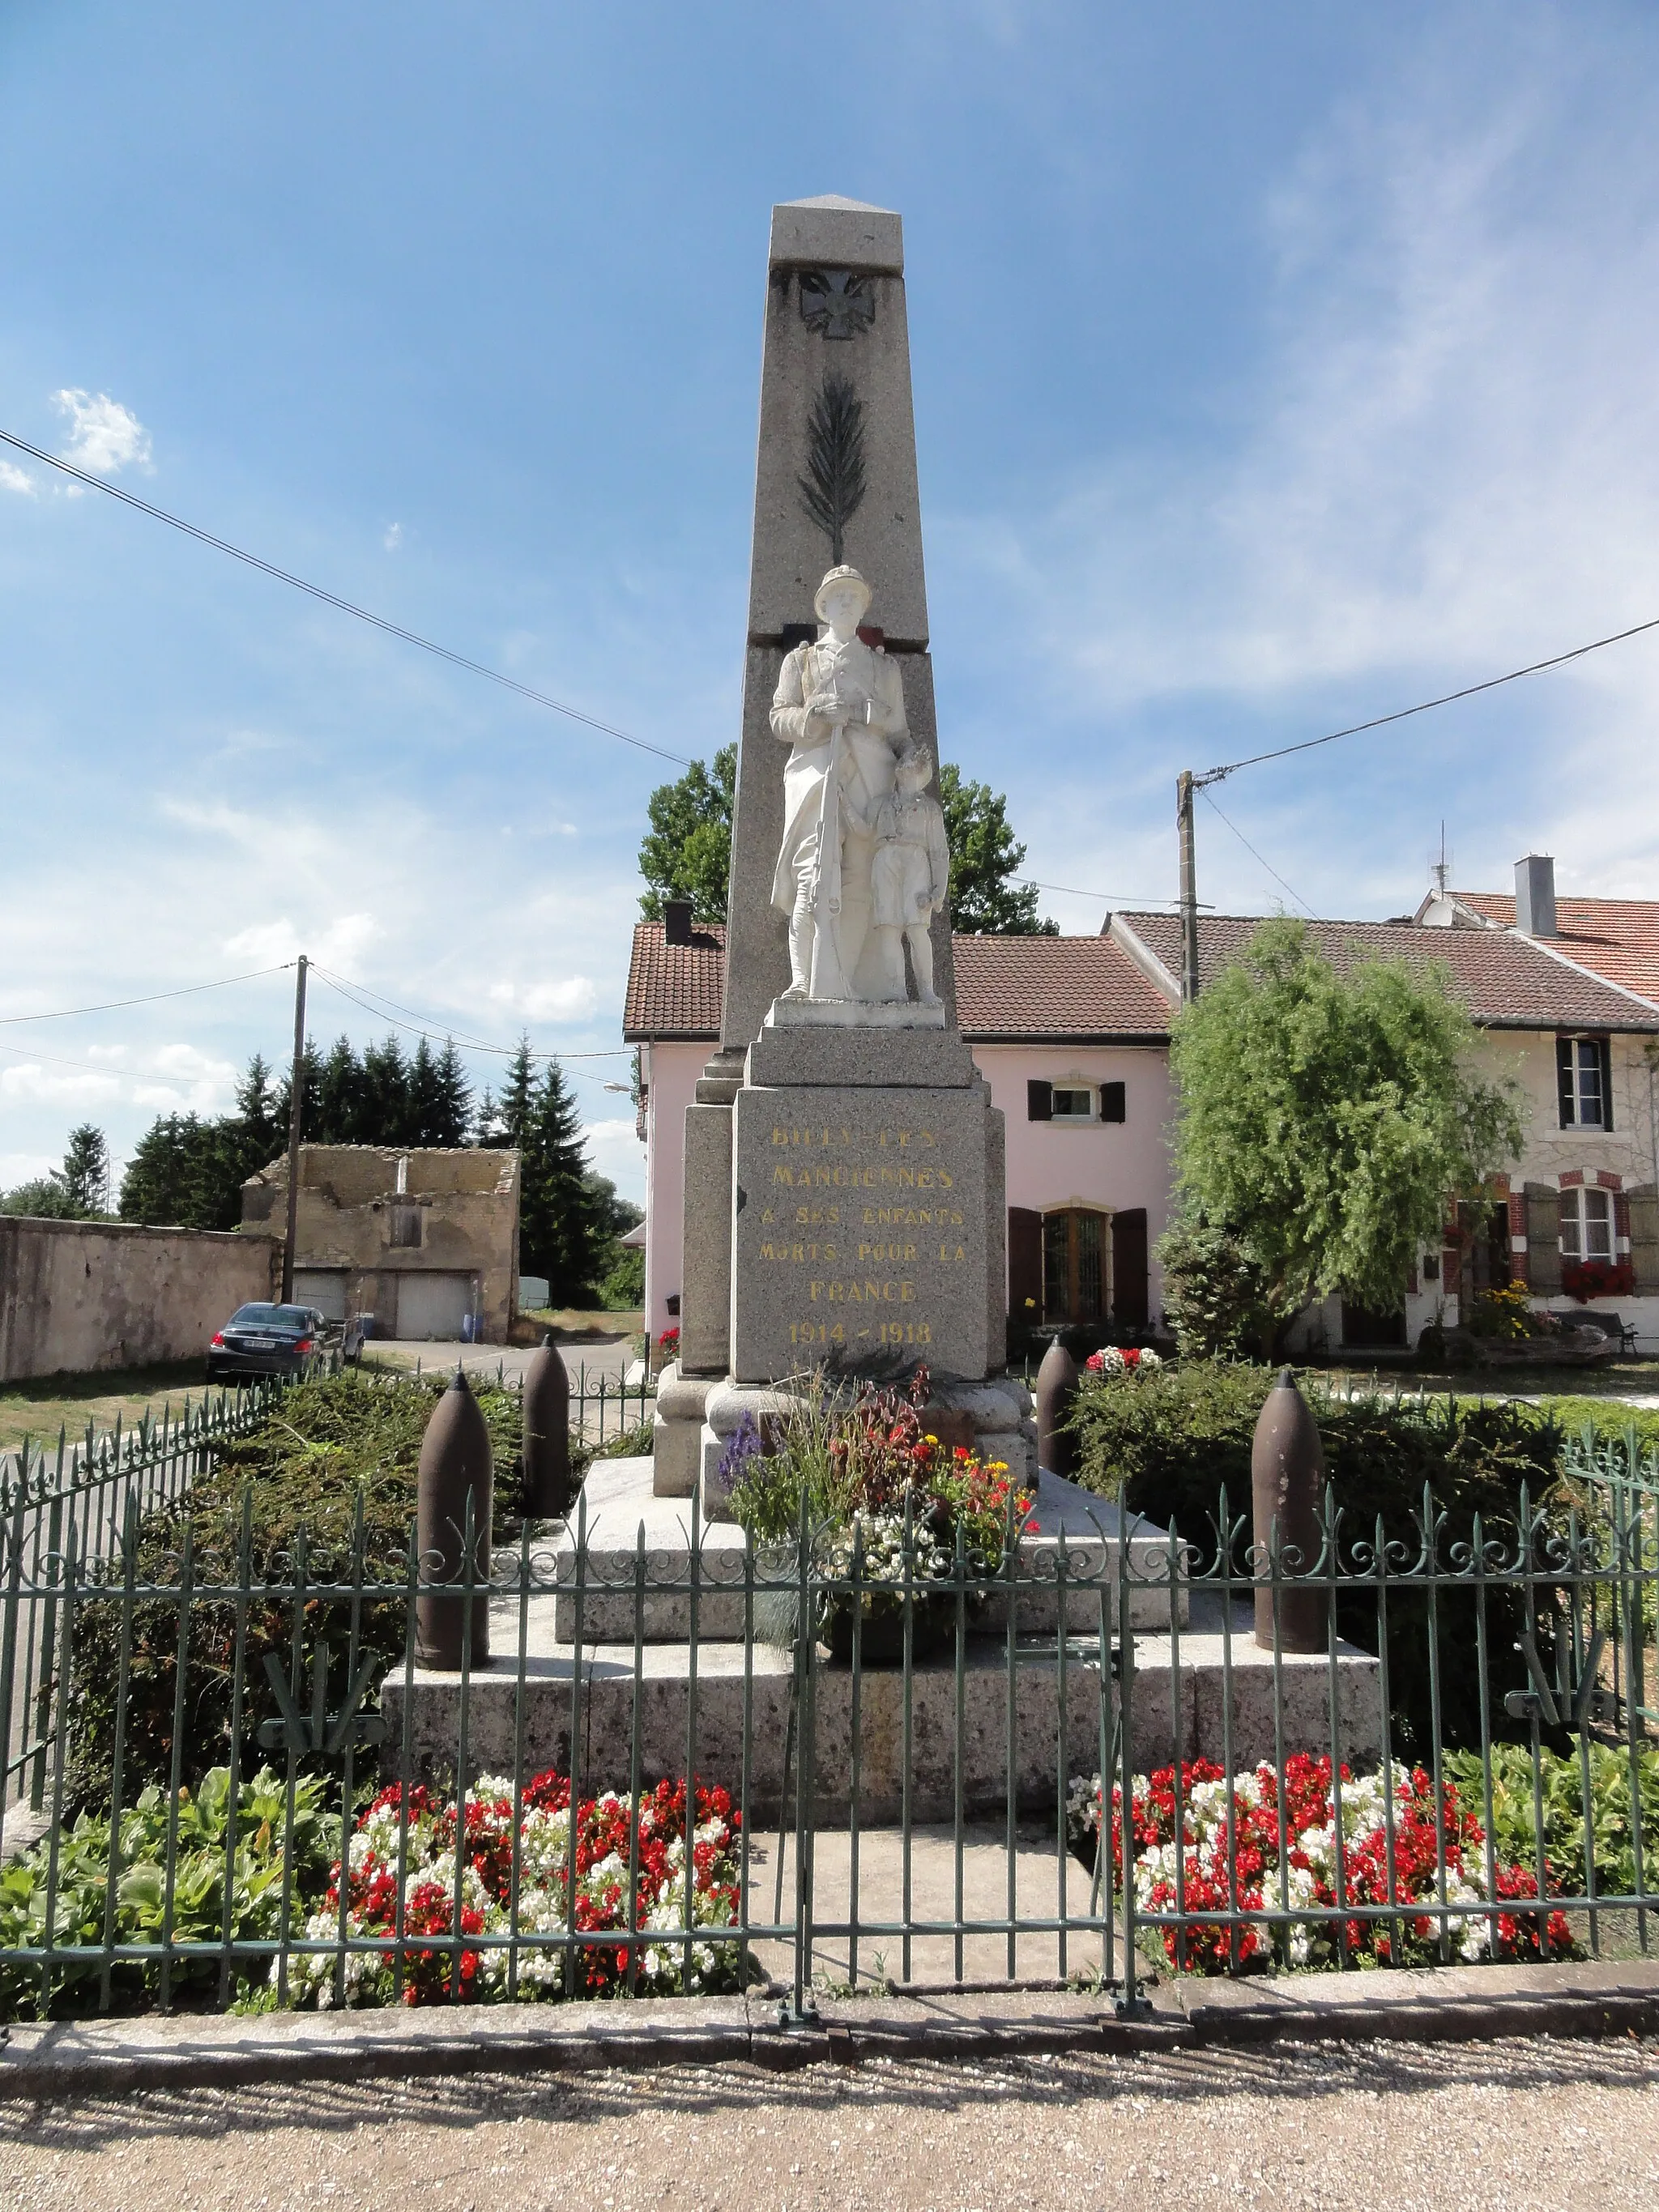 Photo showing: Billy-sous-Mangiennes (Meuse) monument aux morts